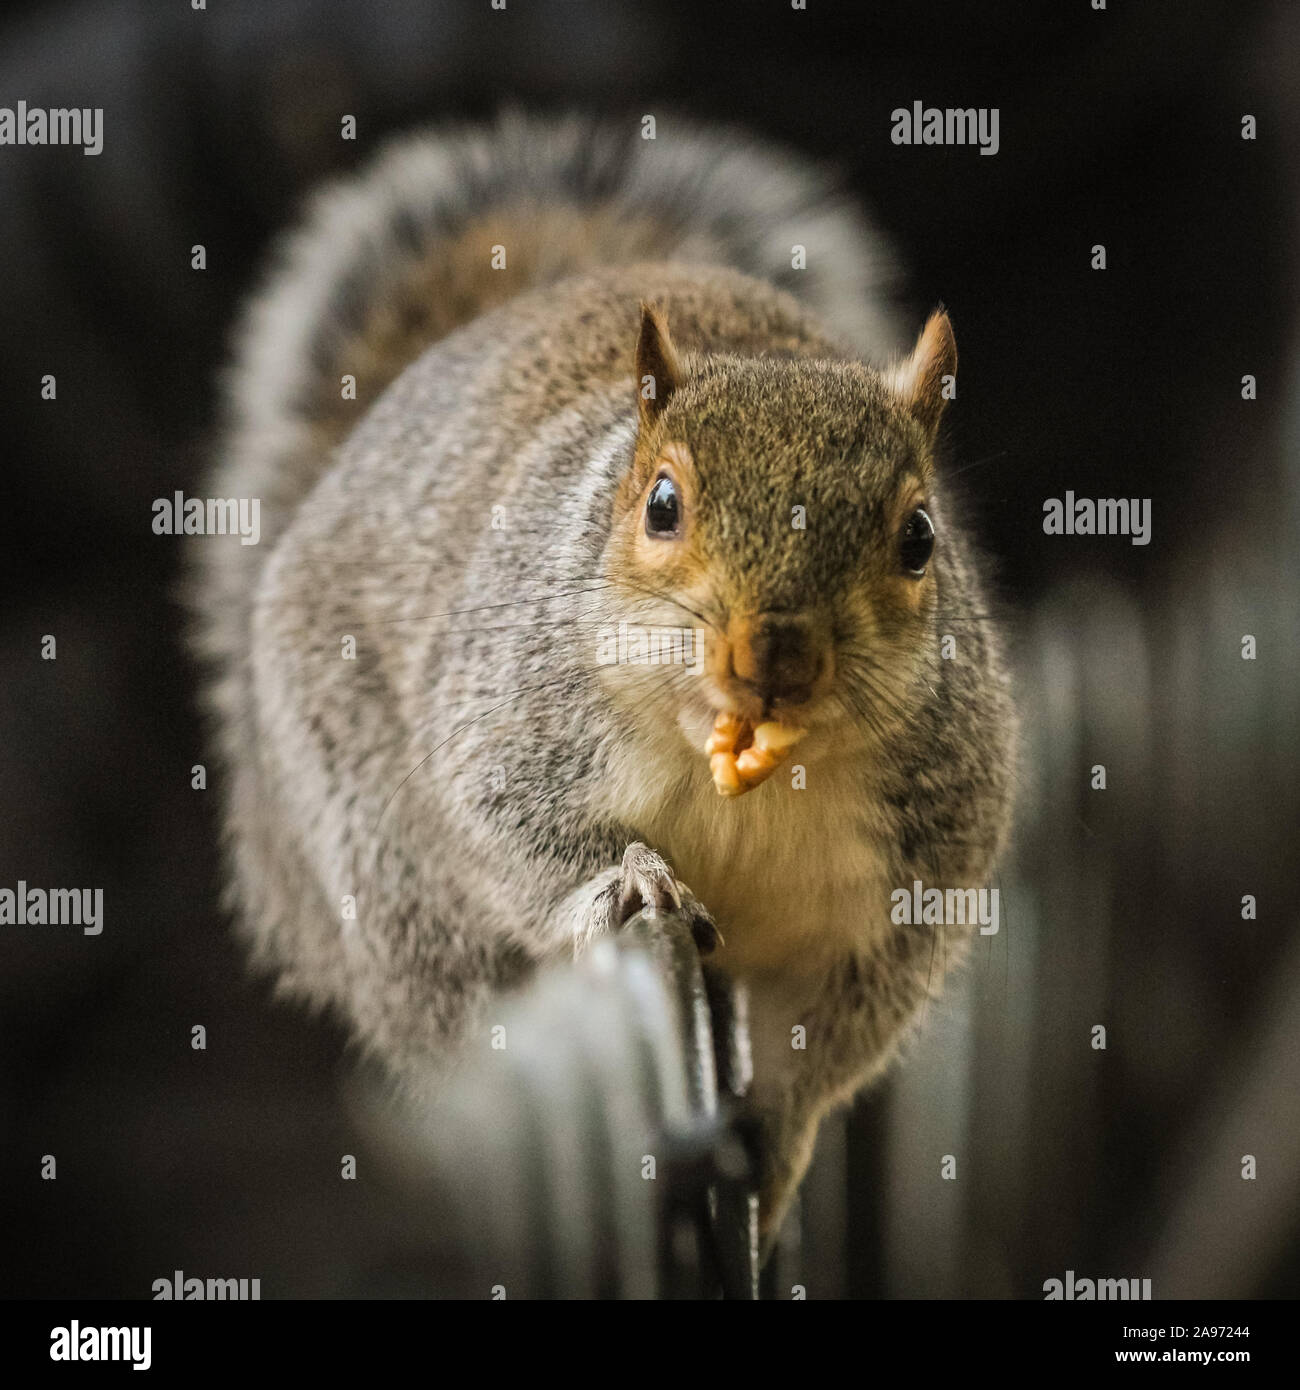 St James's Park, London, UK, 13th November 2019. A squirrel hurries away with its walnut treasure. Squirrels in London's St James's Park in Westminster enjoy the late autumn sunshine, digging for nuts and playing in the colourful fallen leaves. Credit: Imageplotter/Alamy Live News Stock Photo